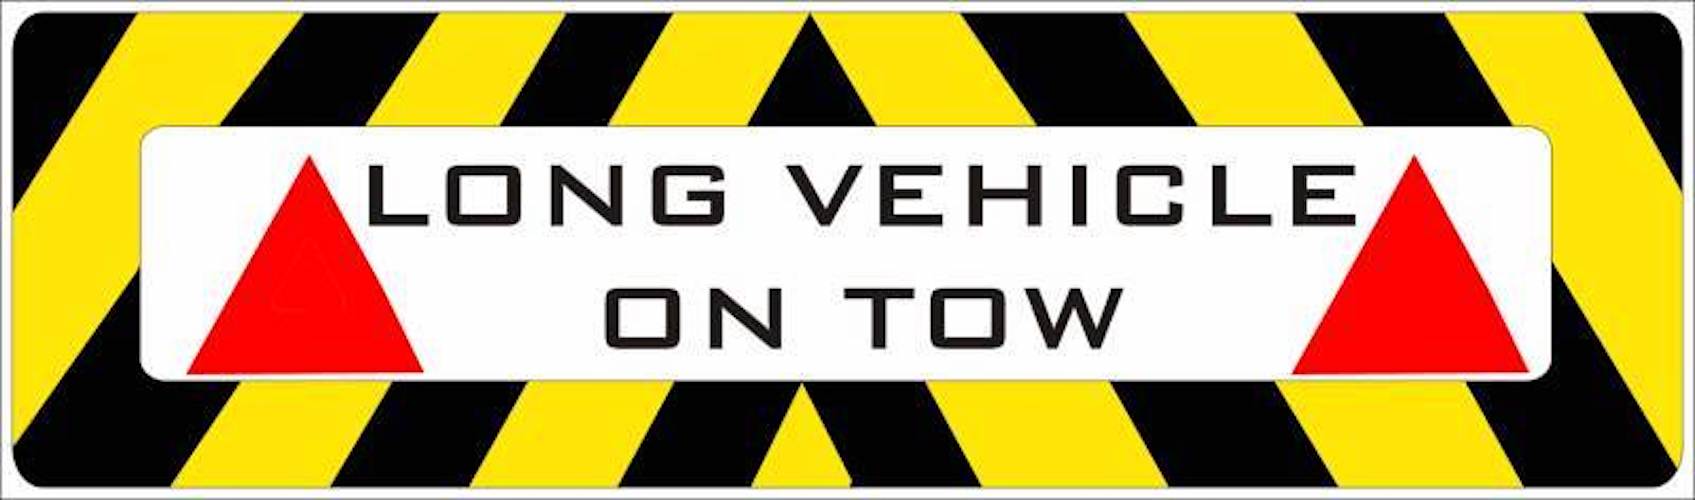 On Tow Sign from TOWtal for Cars with AFrames